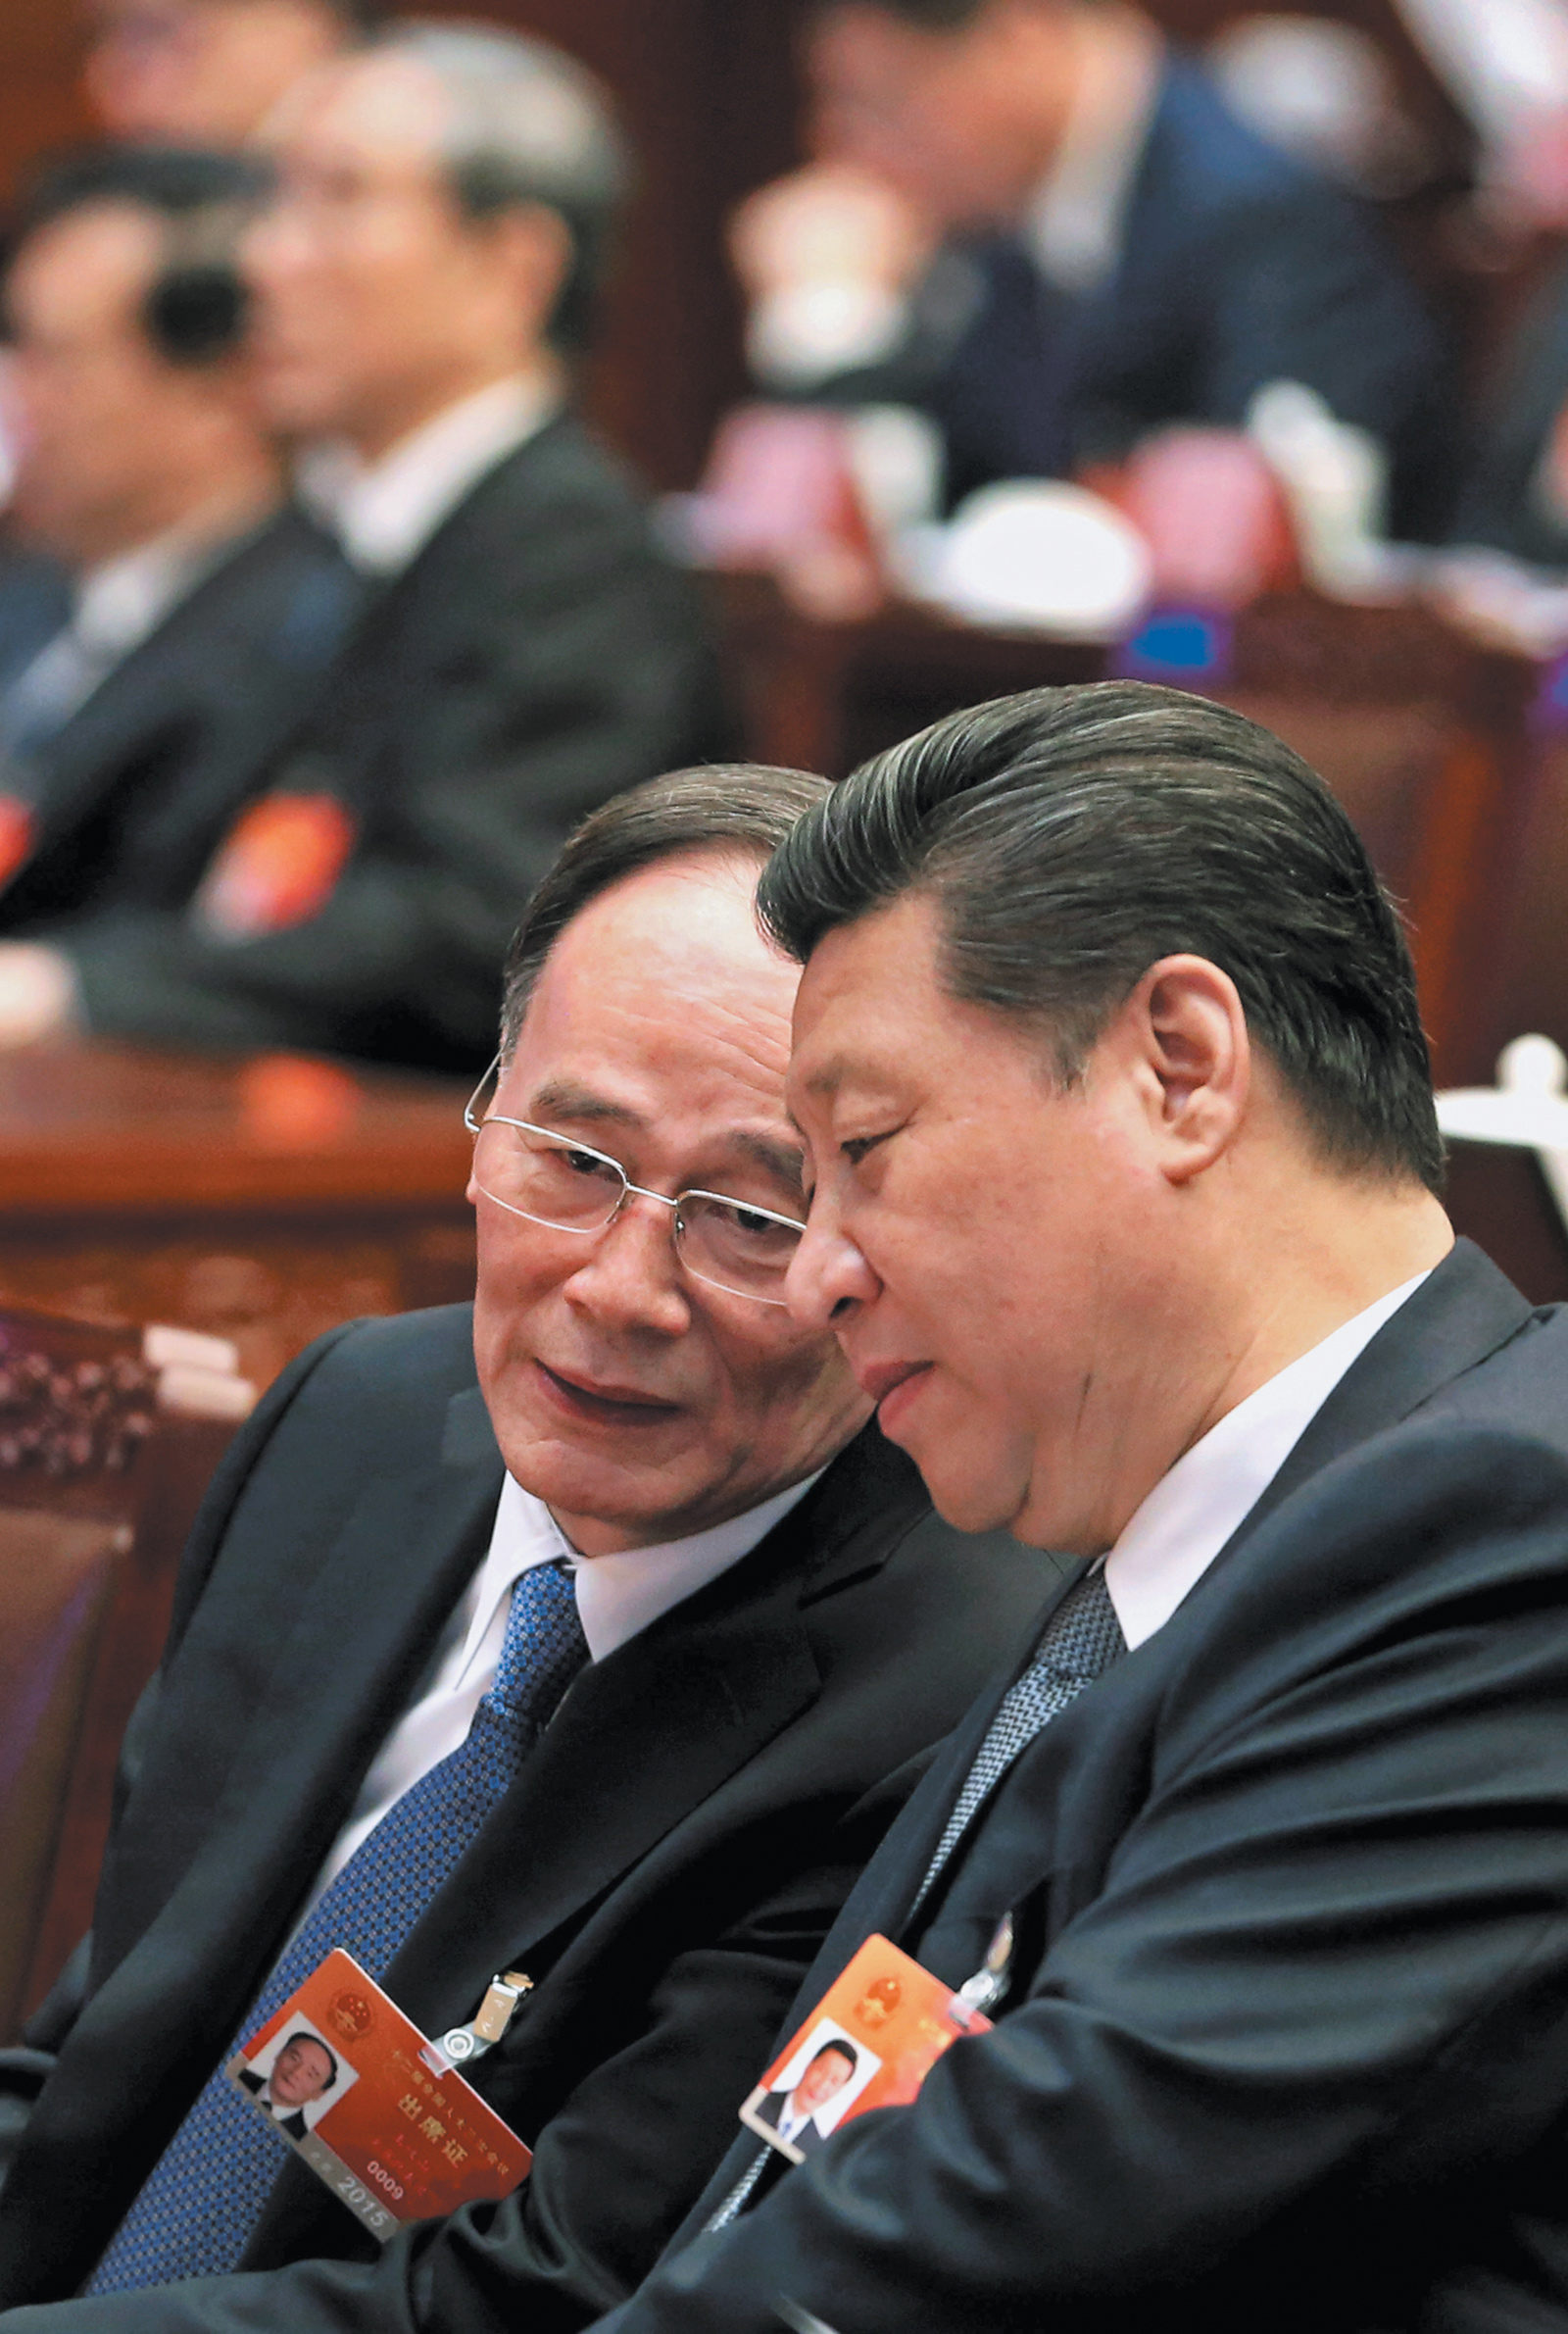 Chinese Communist Party General Secretary Xi Jinping, right, with Wang Qishan, who has been a major force in the recent crackdown as secretary of the Central Commission for Discipline Inspection (CCDI), at the National People’s Congress, Beijing, March 2015